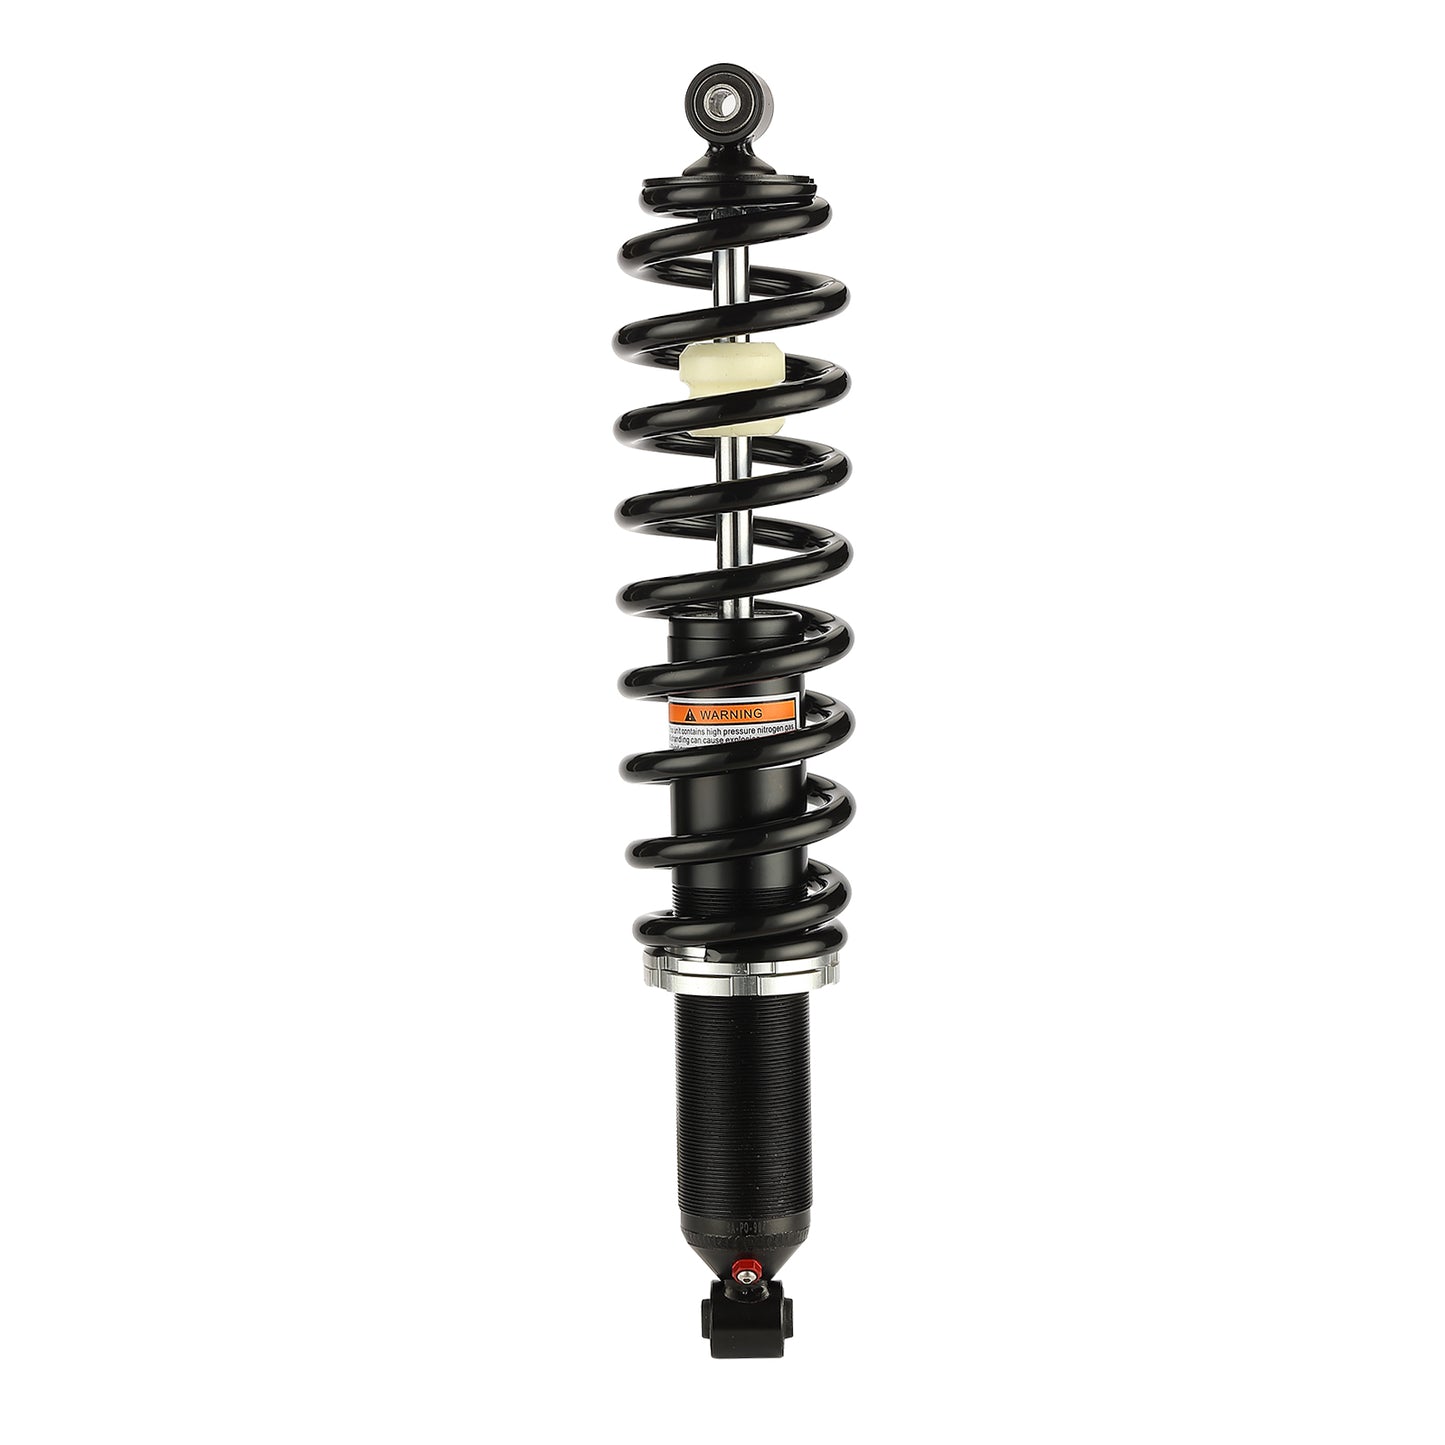 CAM-PO904 Caiman Shock Absorber Front Left Right Shock Absorber Replacement for 2014-2017 Polaris Ranger Diesel, Ranger Crew Diesel XP 1000, Ranger Crew XP 1000 Crew XP 900 Front Shock